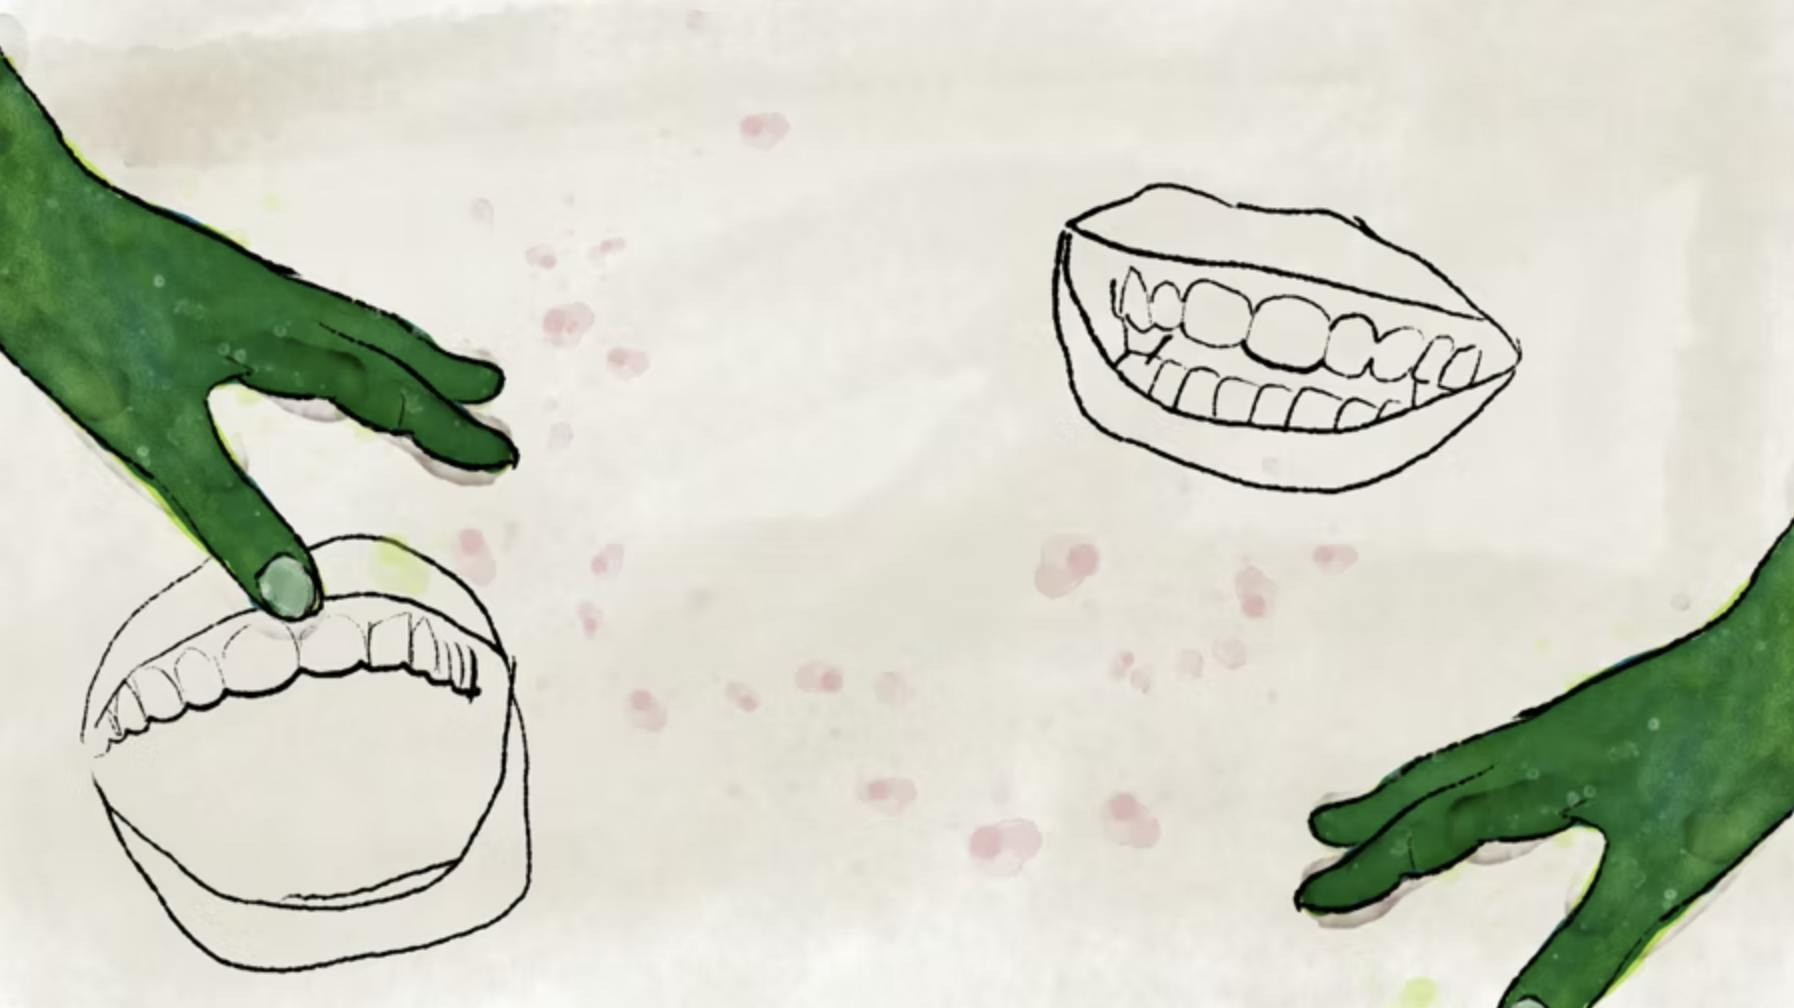 Two green hands and two line-drawing mouths on a background of slightly rumpled white paper, with pinkish splotches.